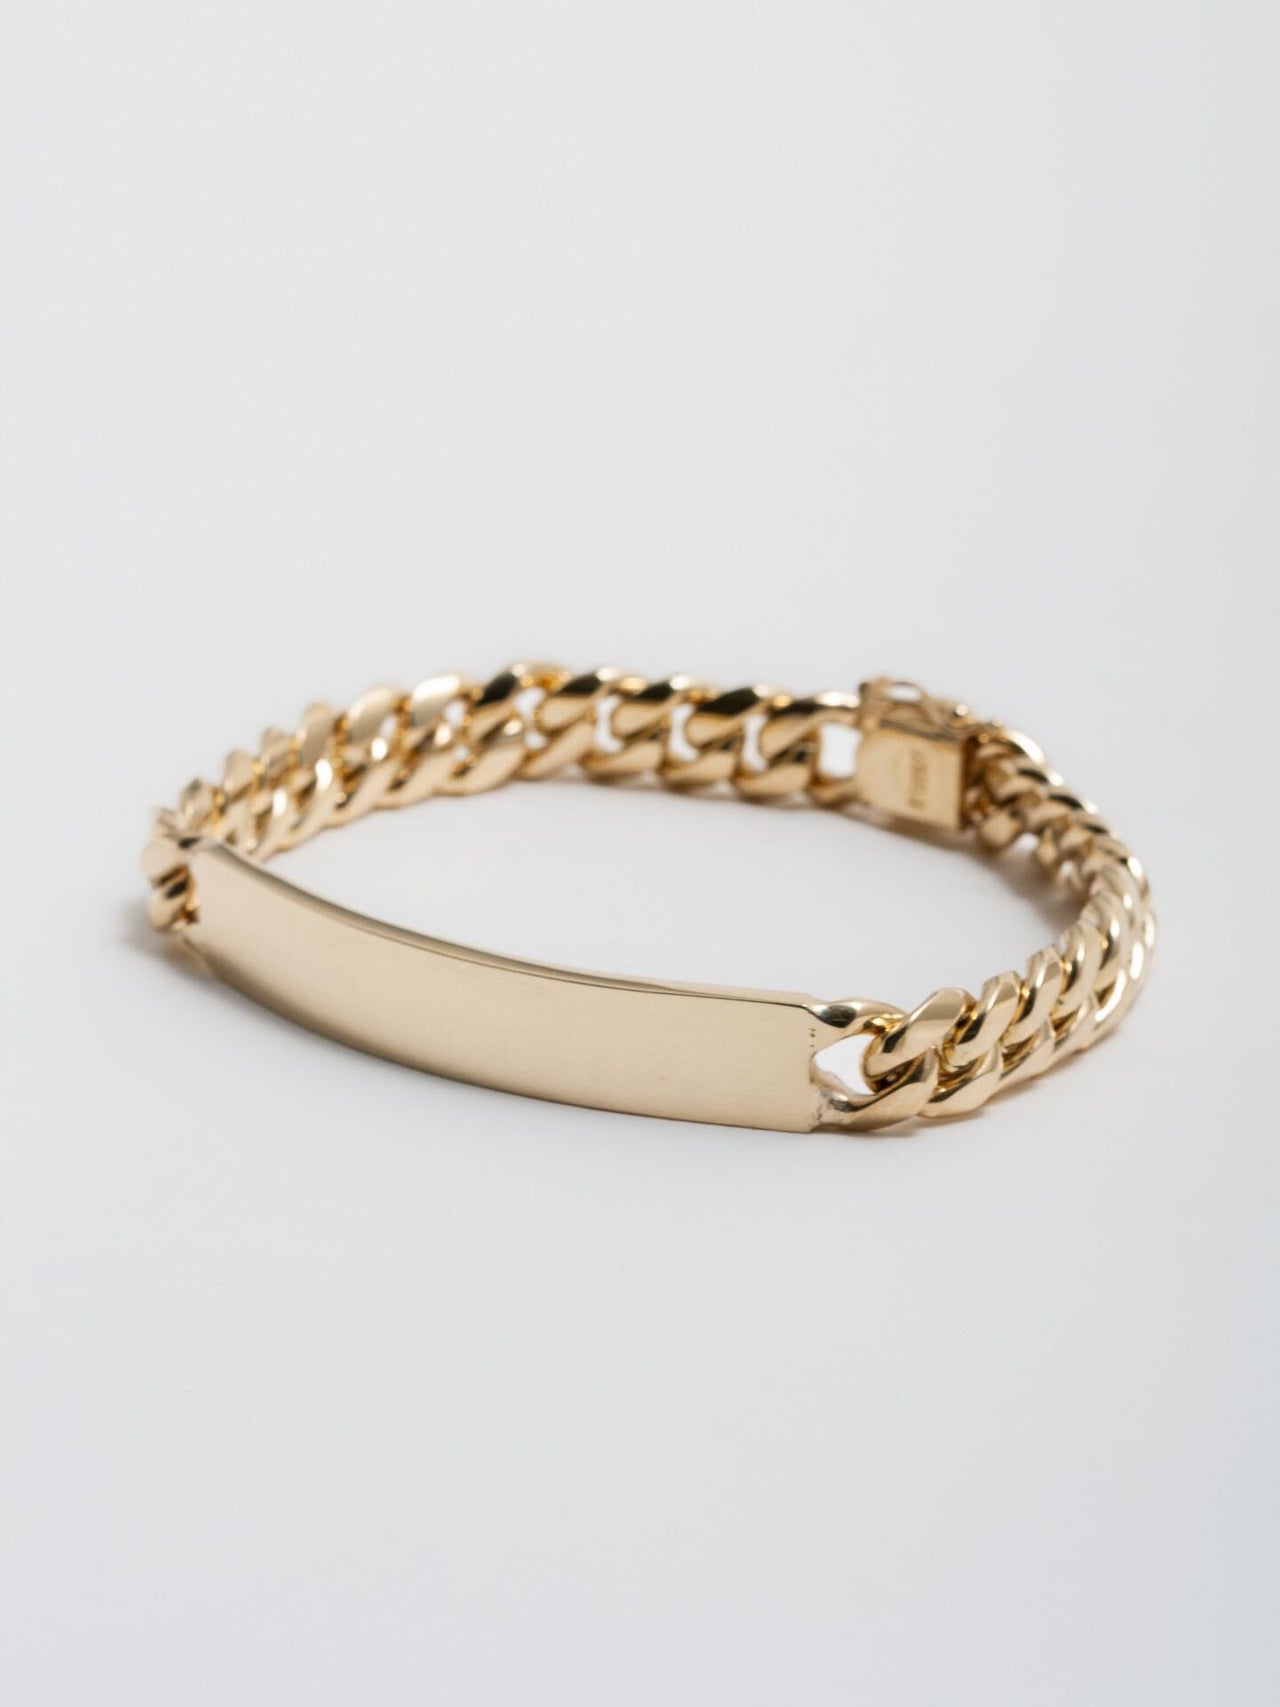 14kt Yellow Gold Solid XL Cuban Chain ID Bracelet clasped and pictured on light grey background. 